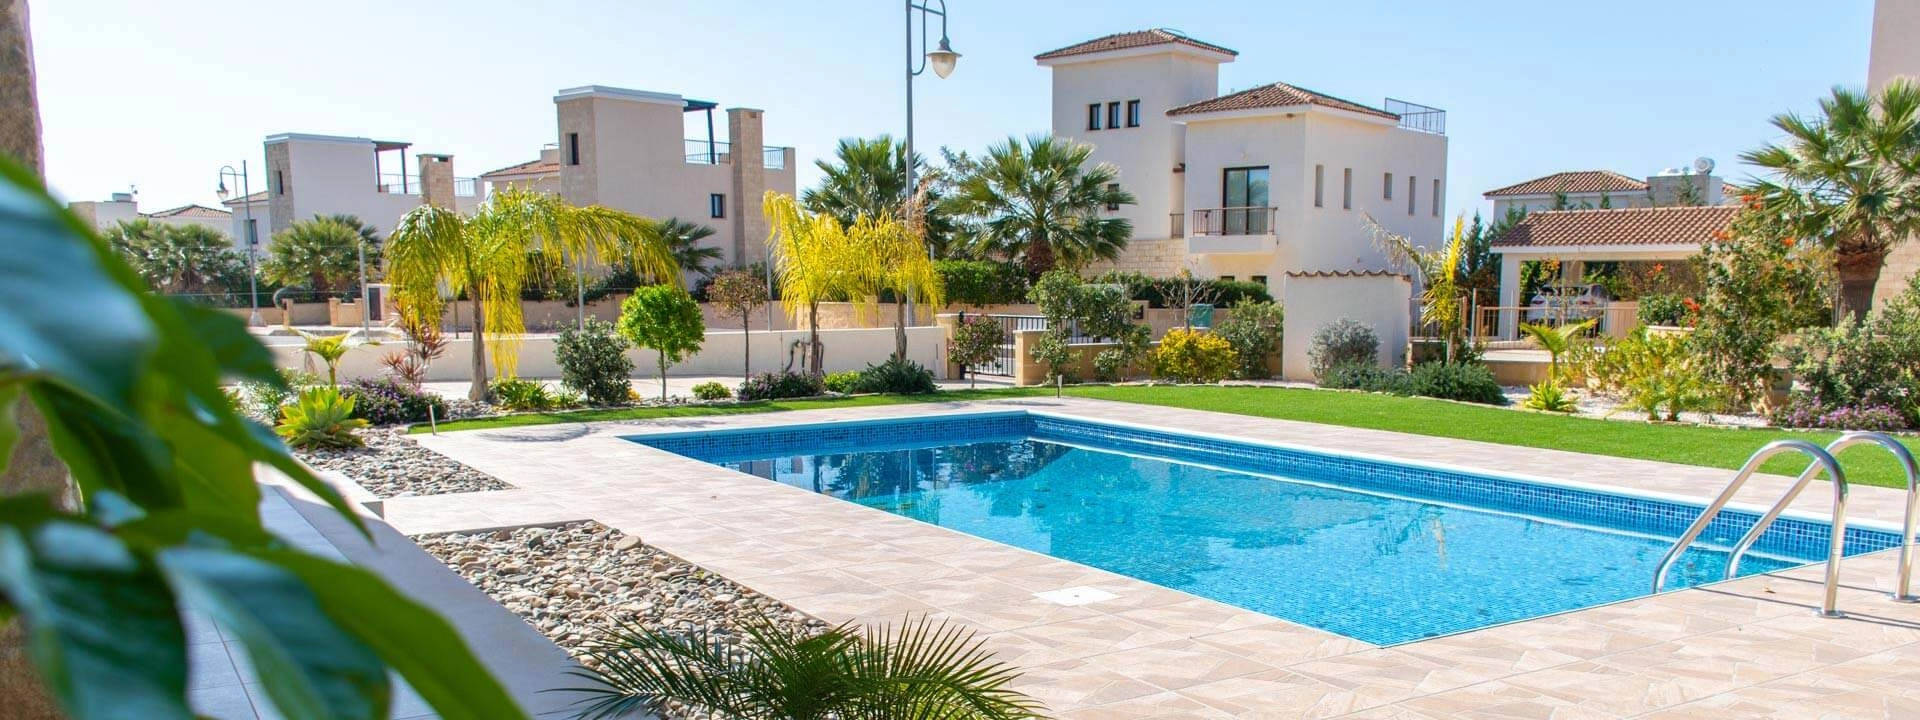 2 Bedroom House for Sale in Paphos District